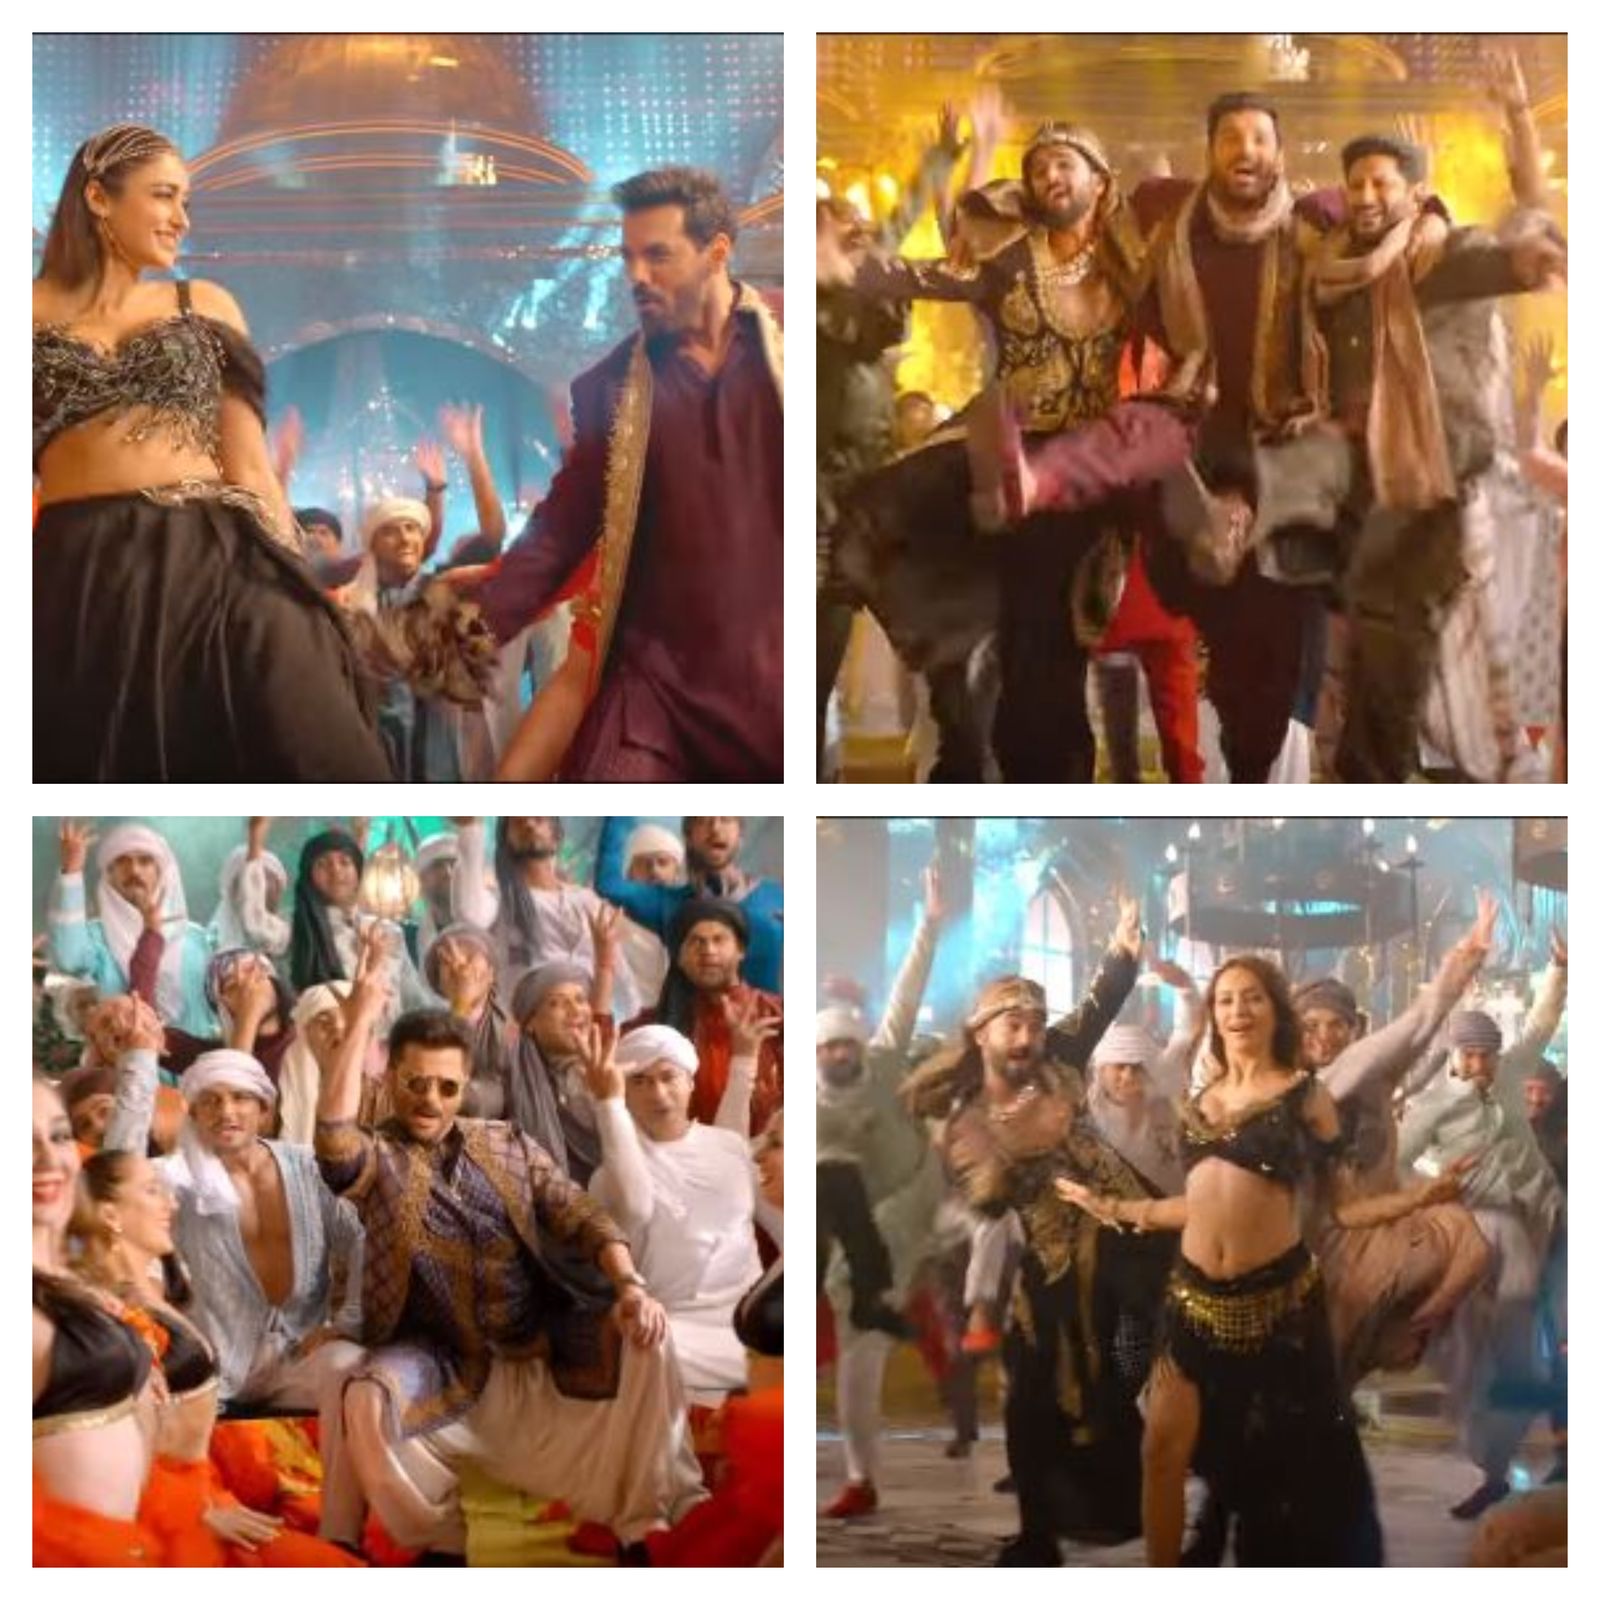 Pagalpanti’s Walla Walla Song Is Yet Another Dance Number We Did Not Ask For But Will Live With